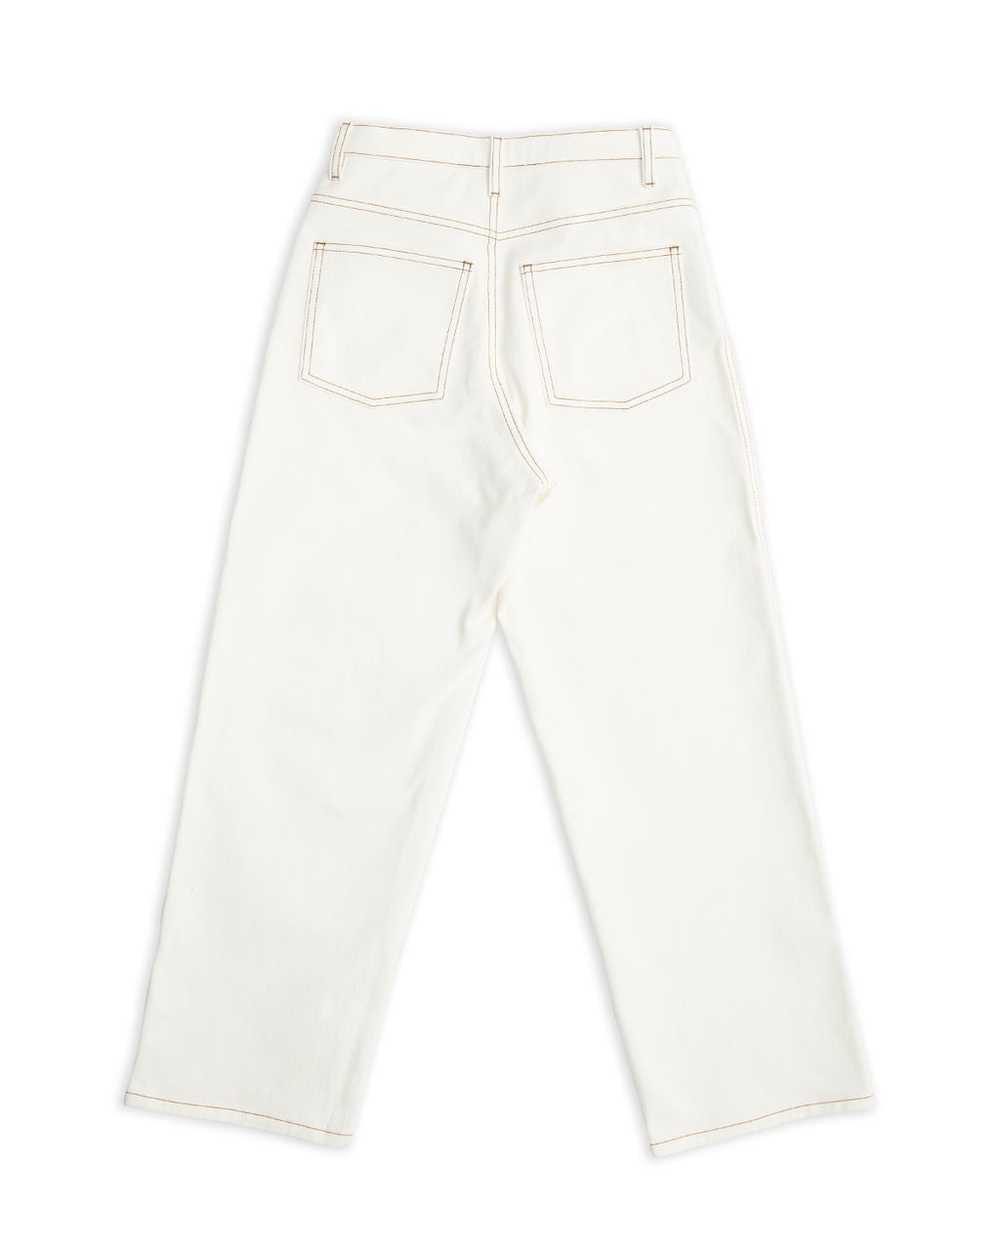 James Street Co. MILL PANT - image 7